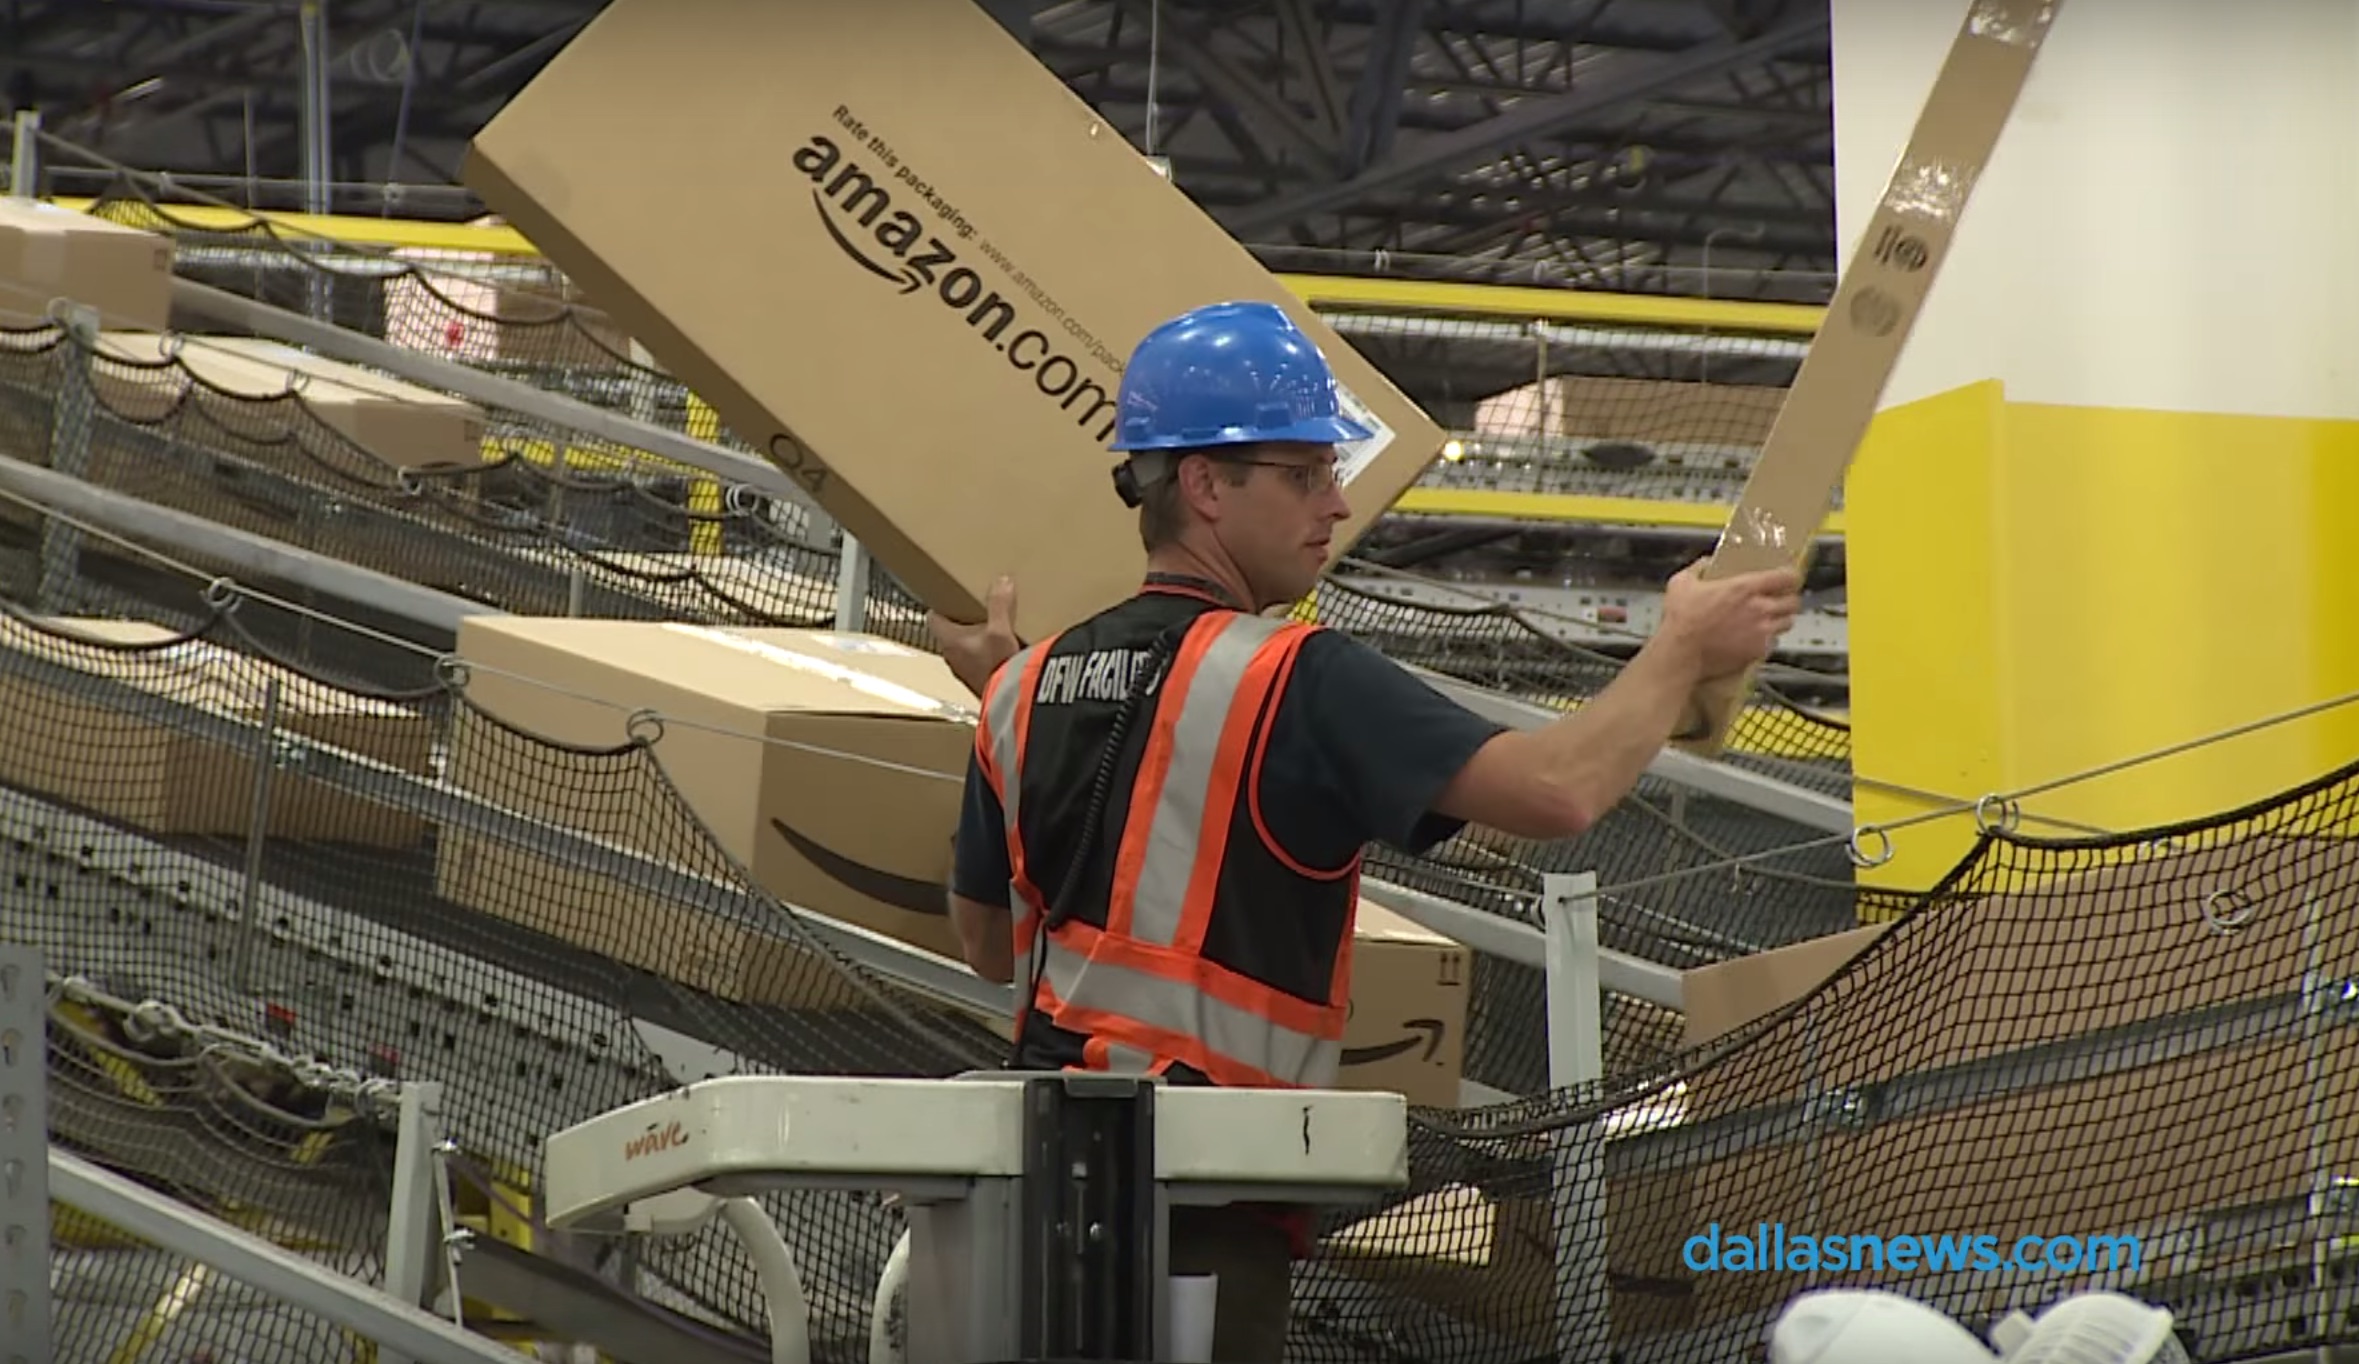 Watch An Amazon Fulfillment Center In Action